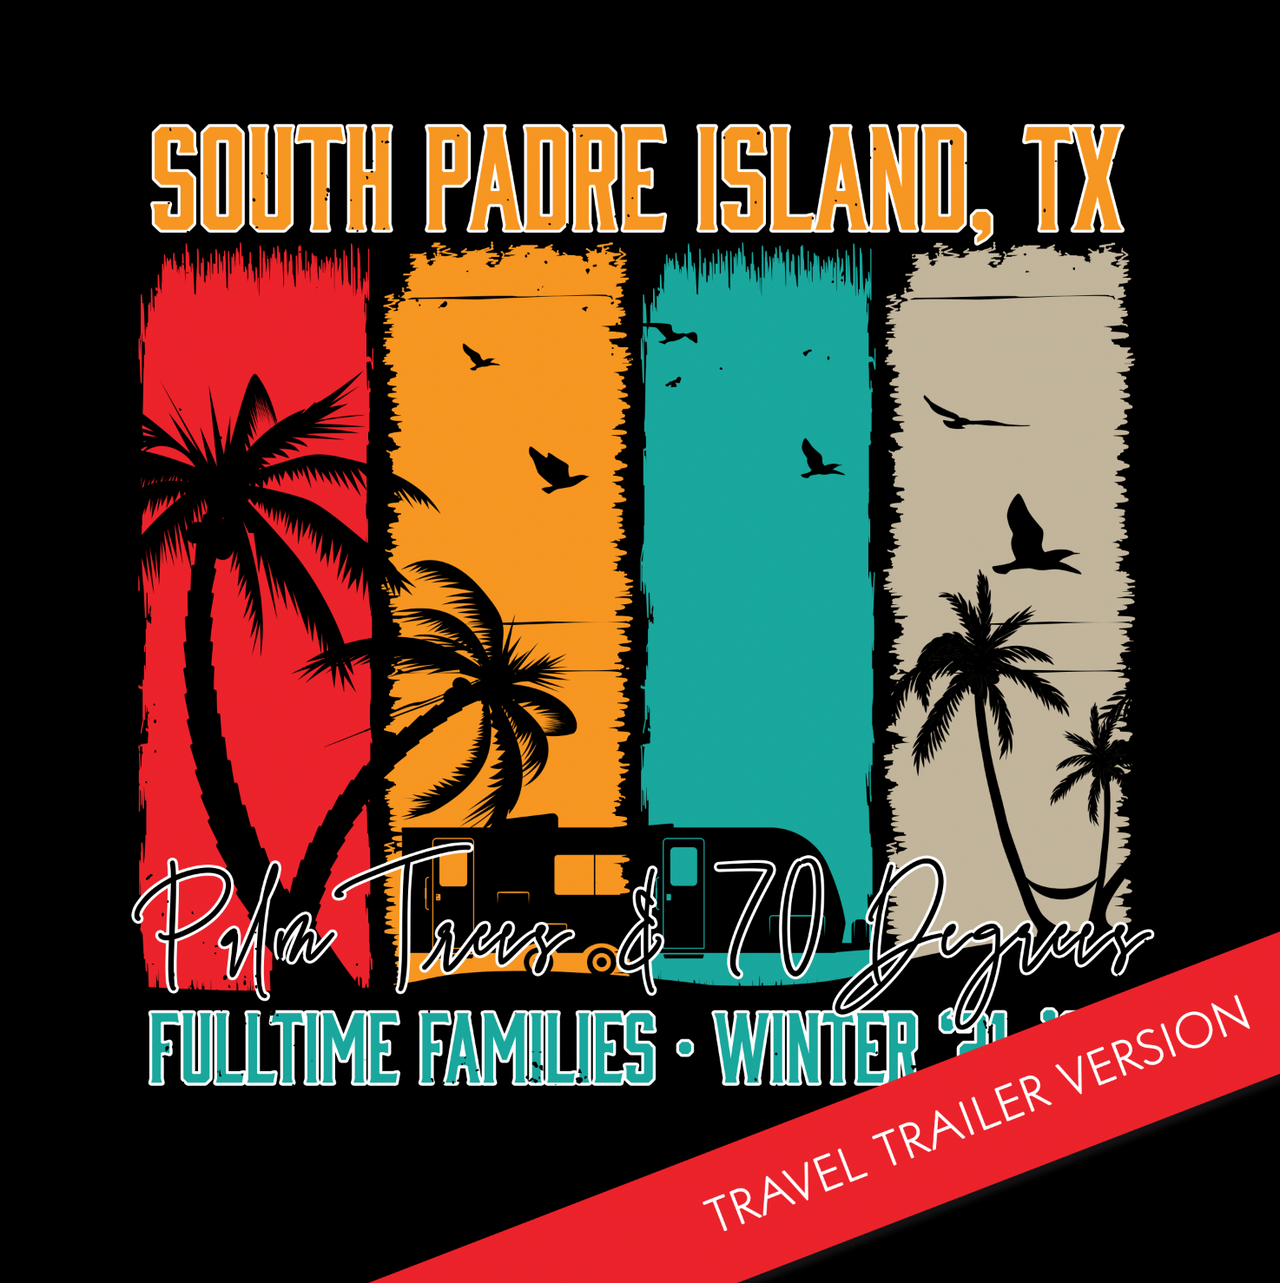 Fulltime Families South Padre Island Winter '21-'22 Limited Edition Shirt- Travel Trailer